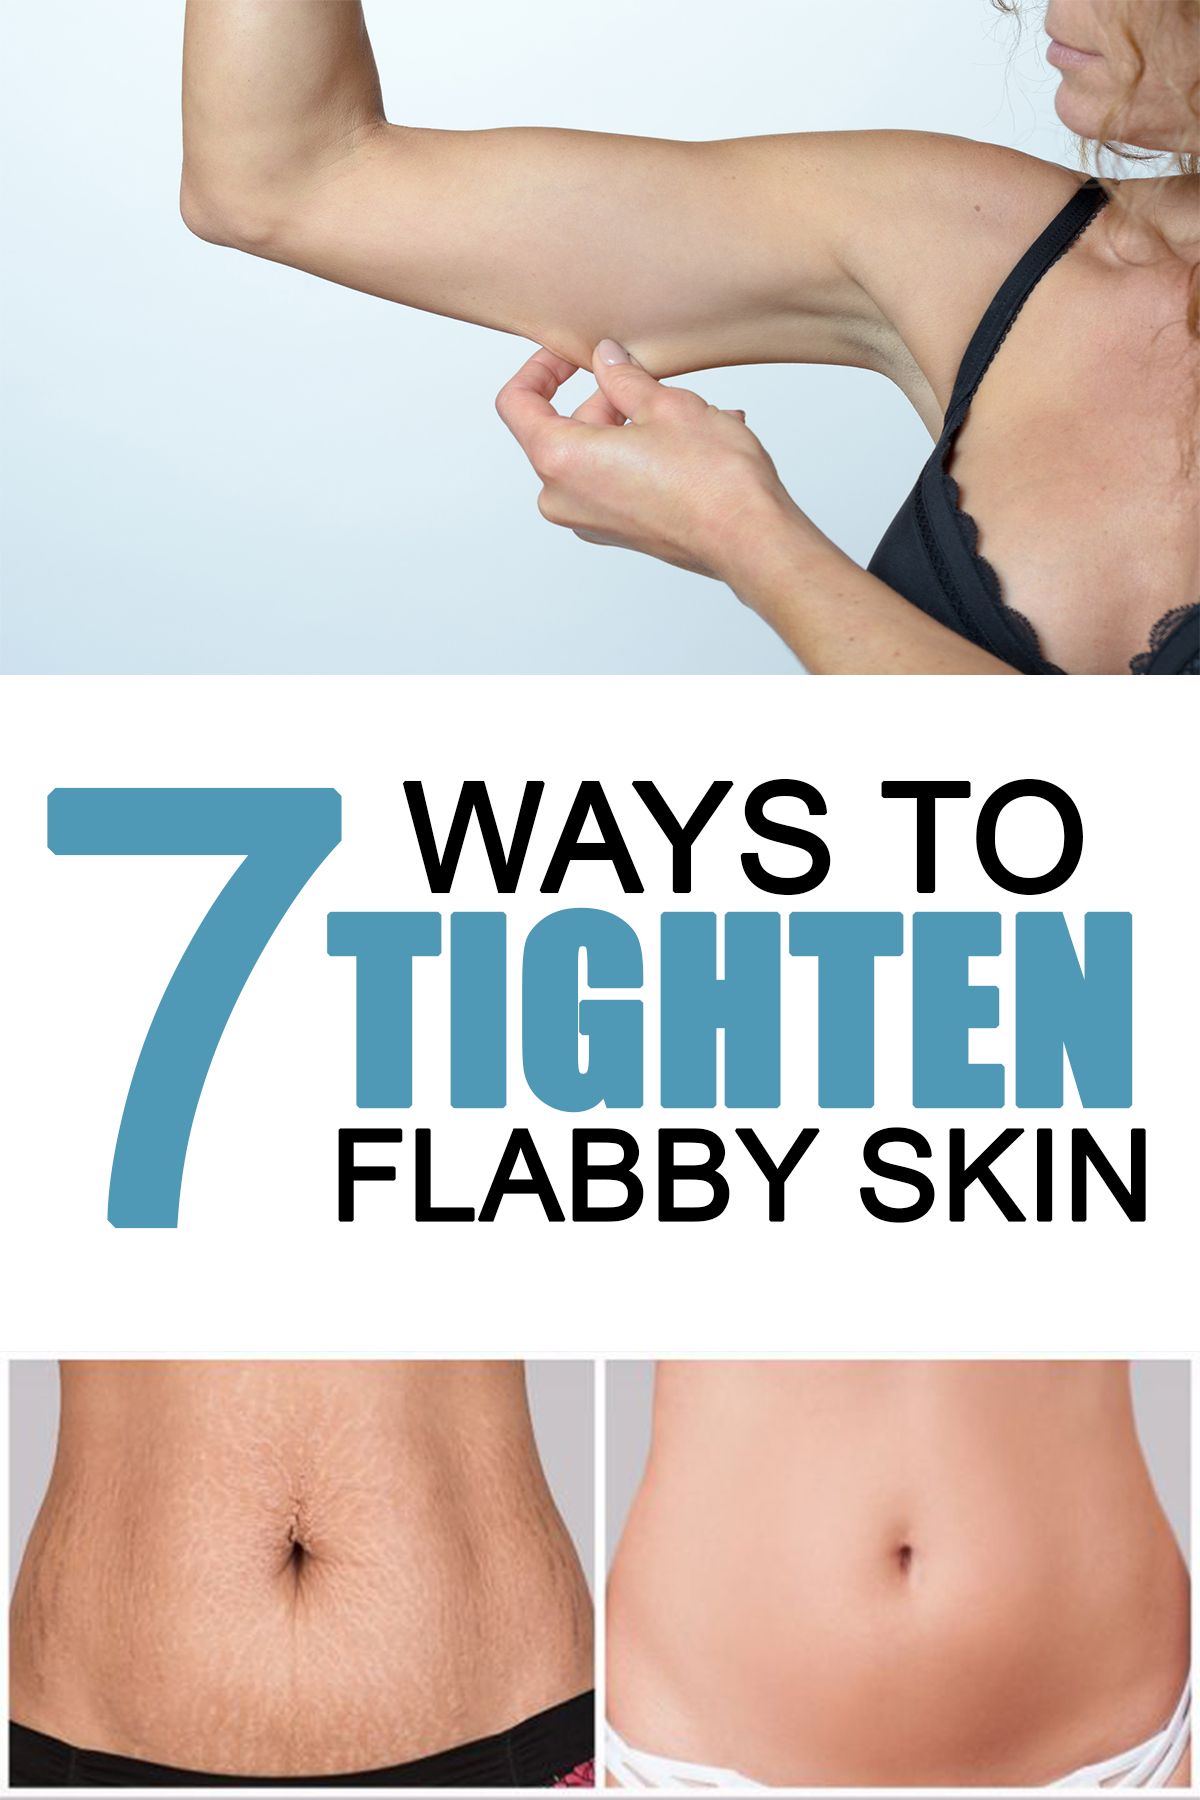 7 Ways To Tighten Flabby Skin After Weight Loss